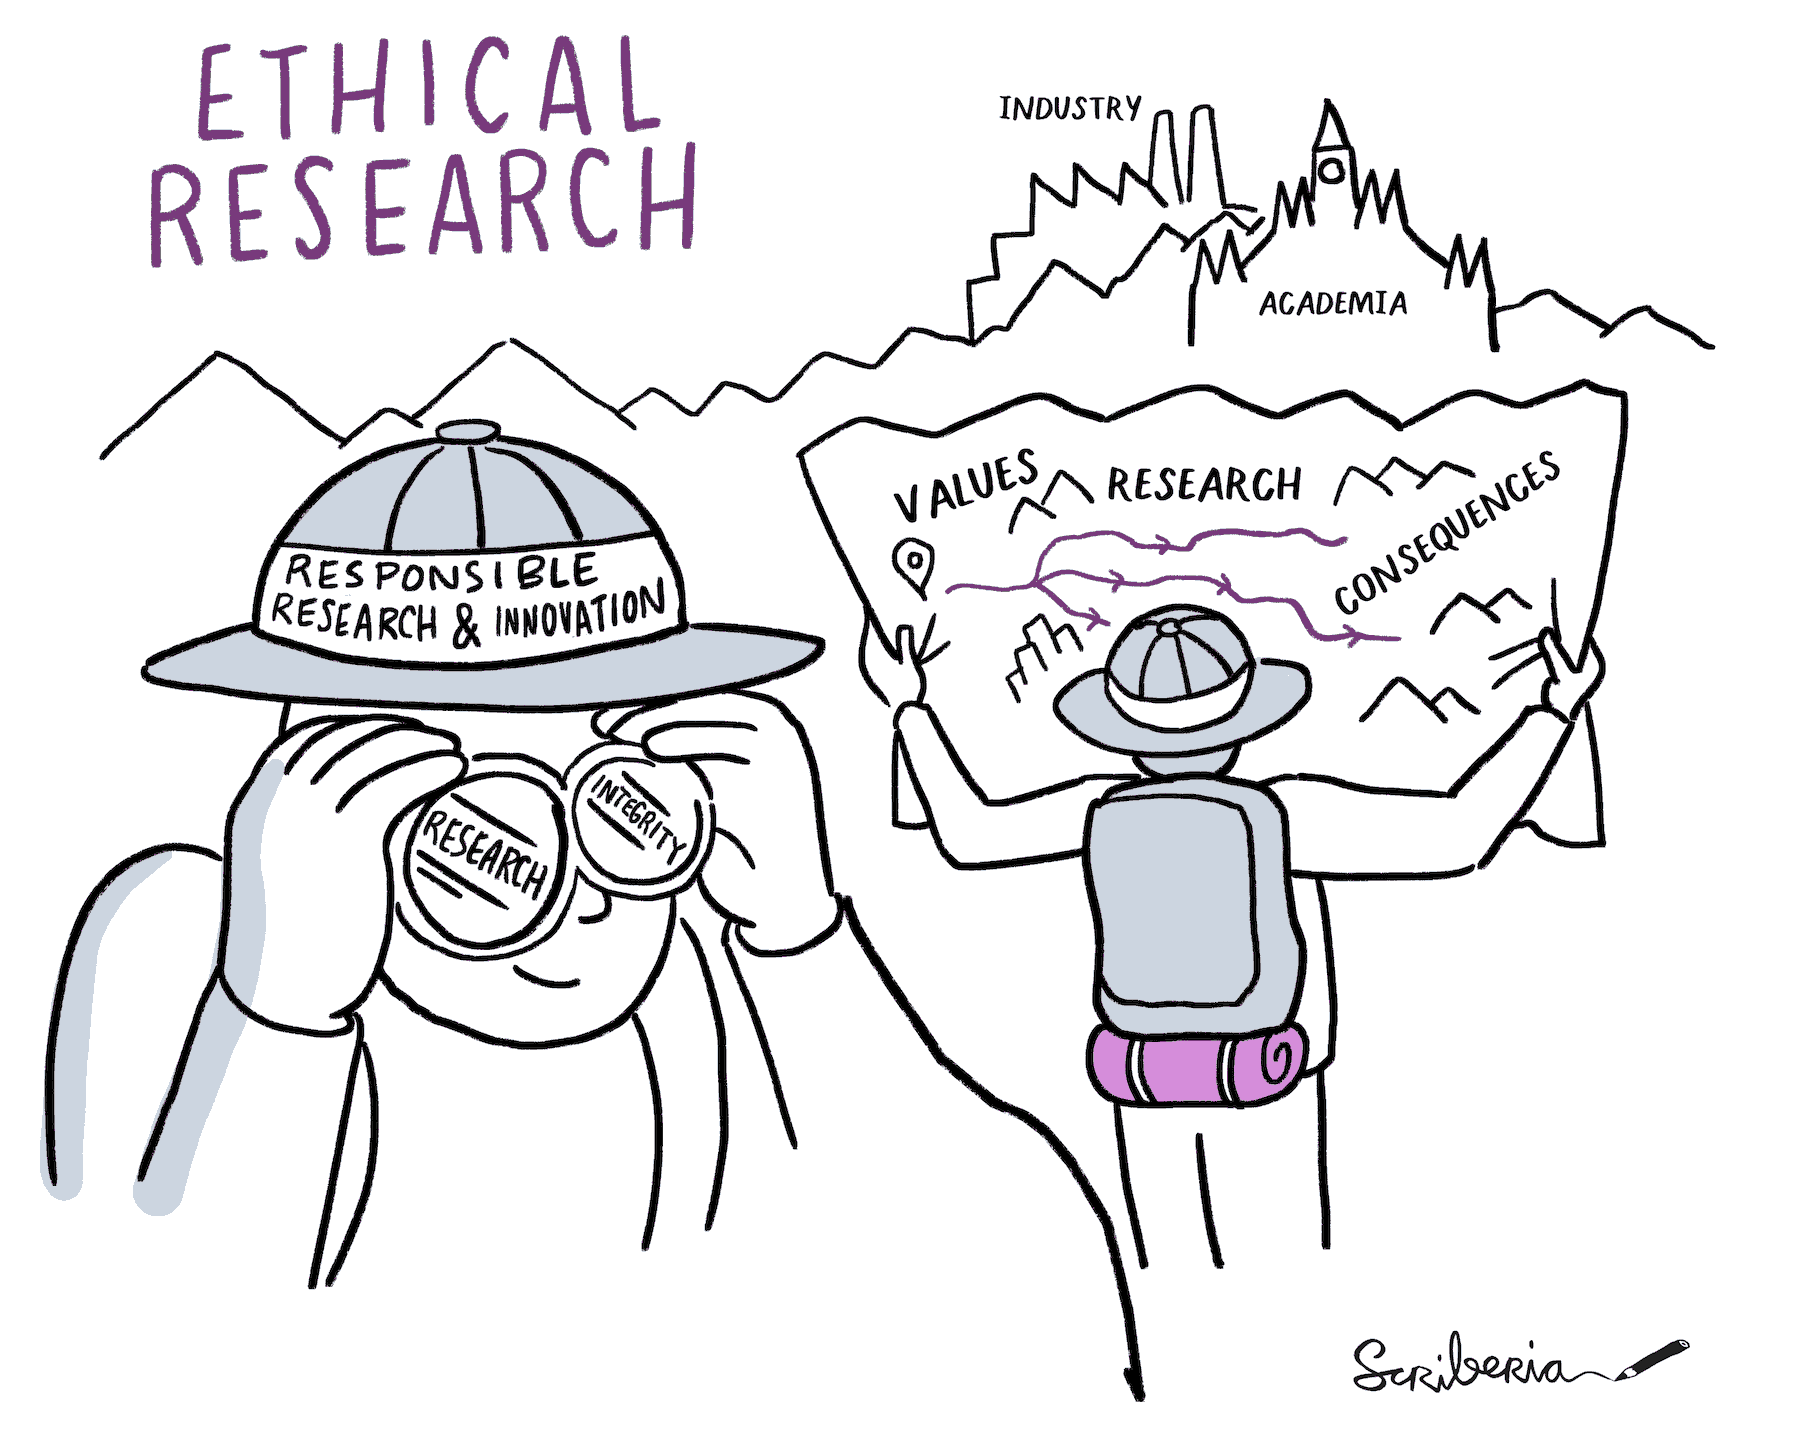 One person looks for research integrity and another person holds up a map and looks for the research consequences.